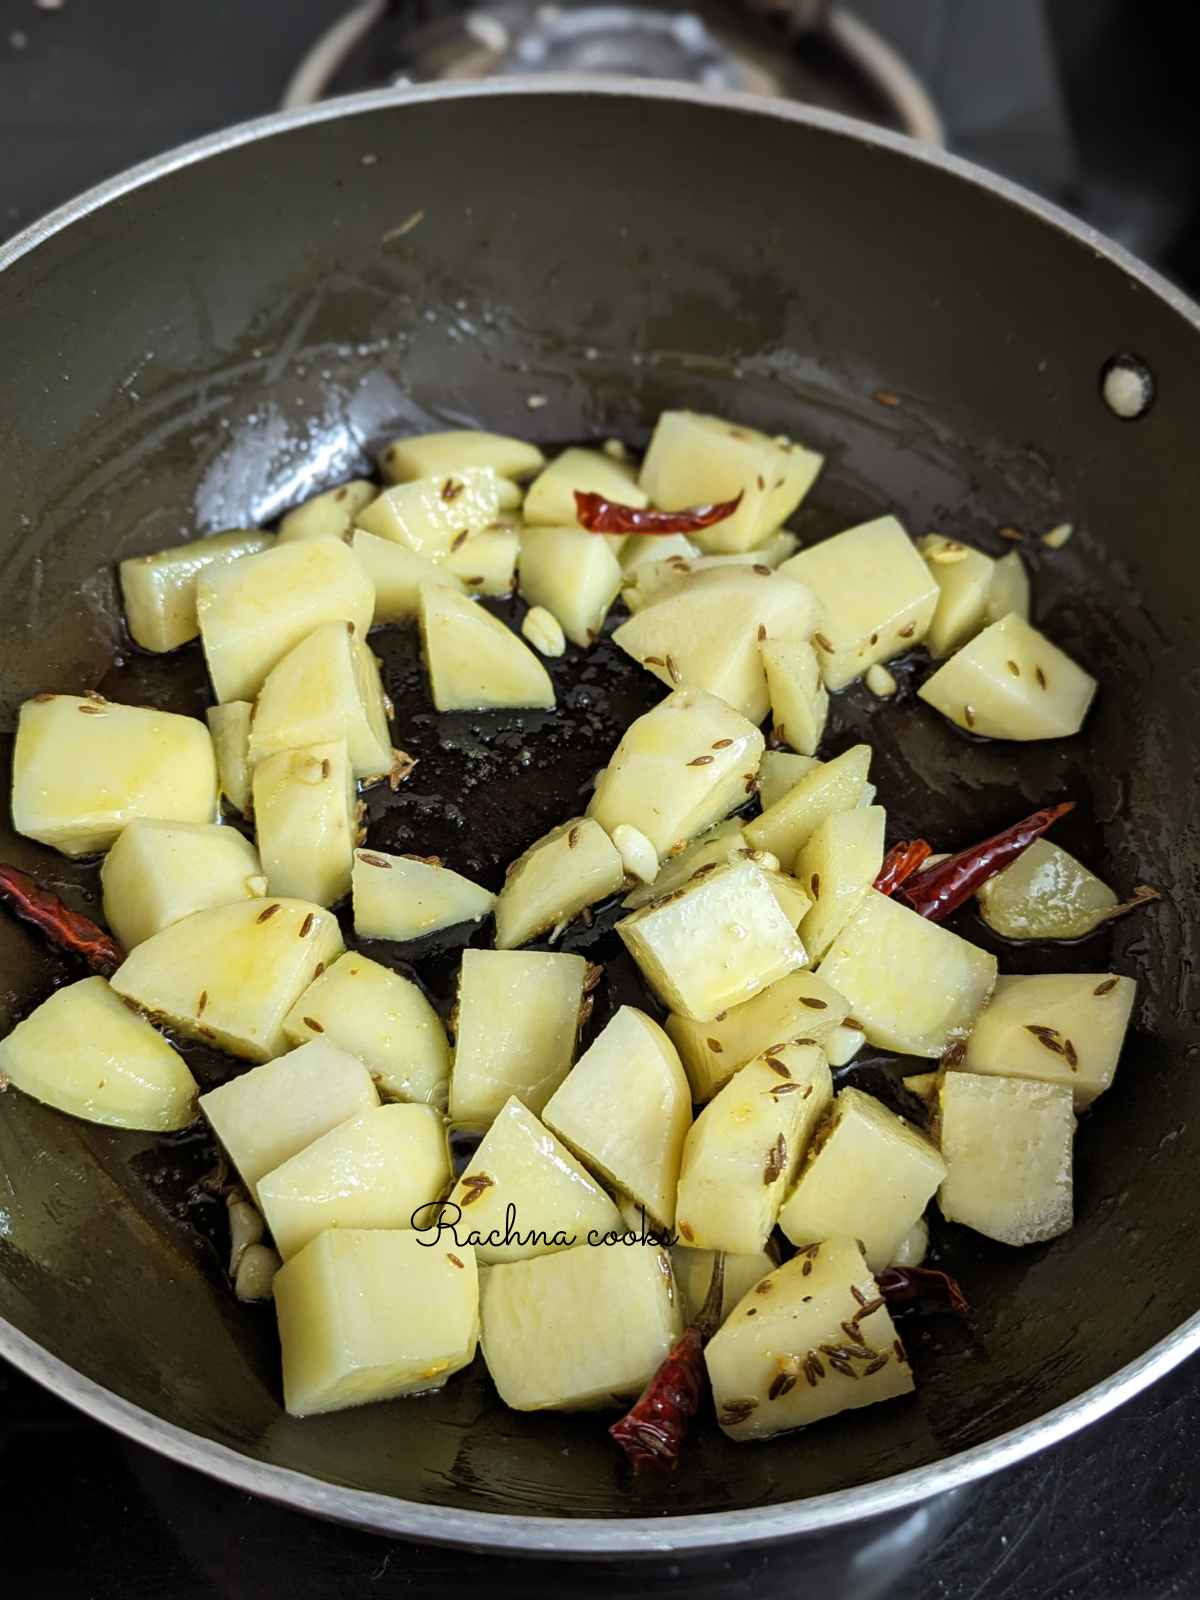 Chopped and cubed potatoes added to oil, cumin seeds and dry red chillies.